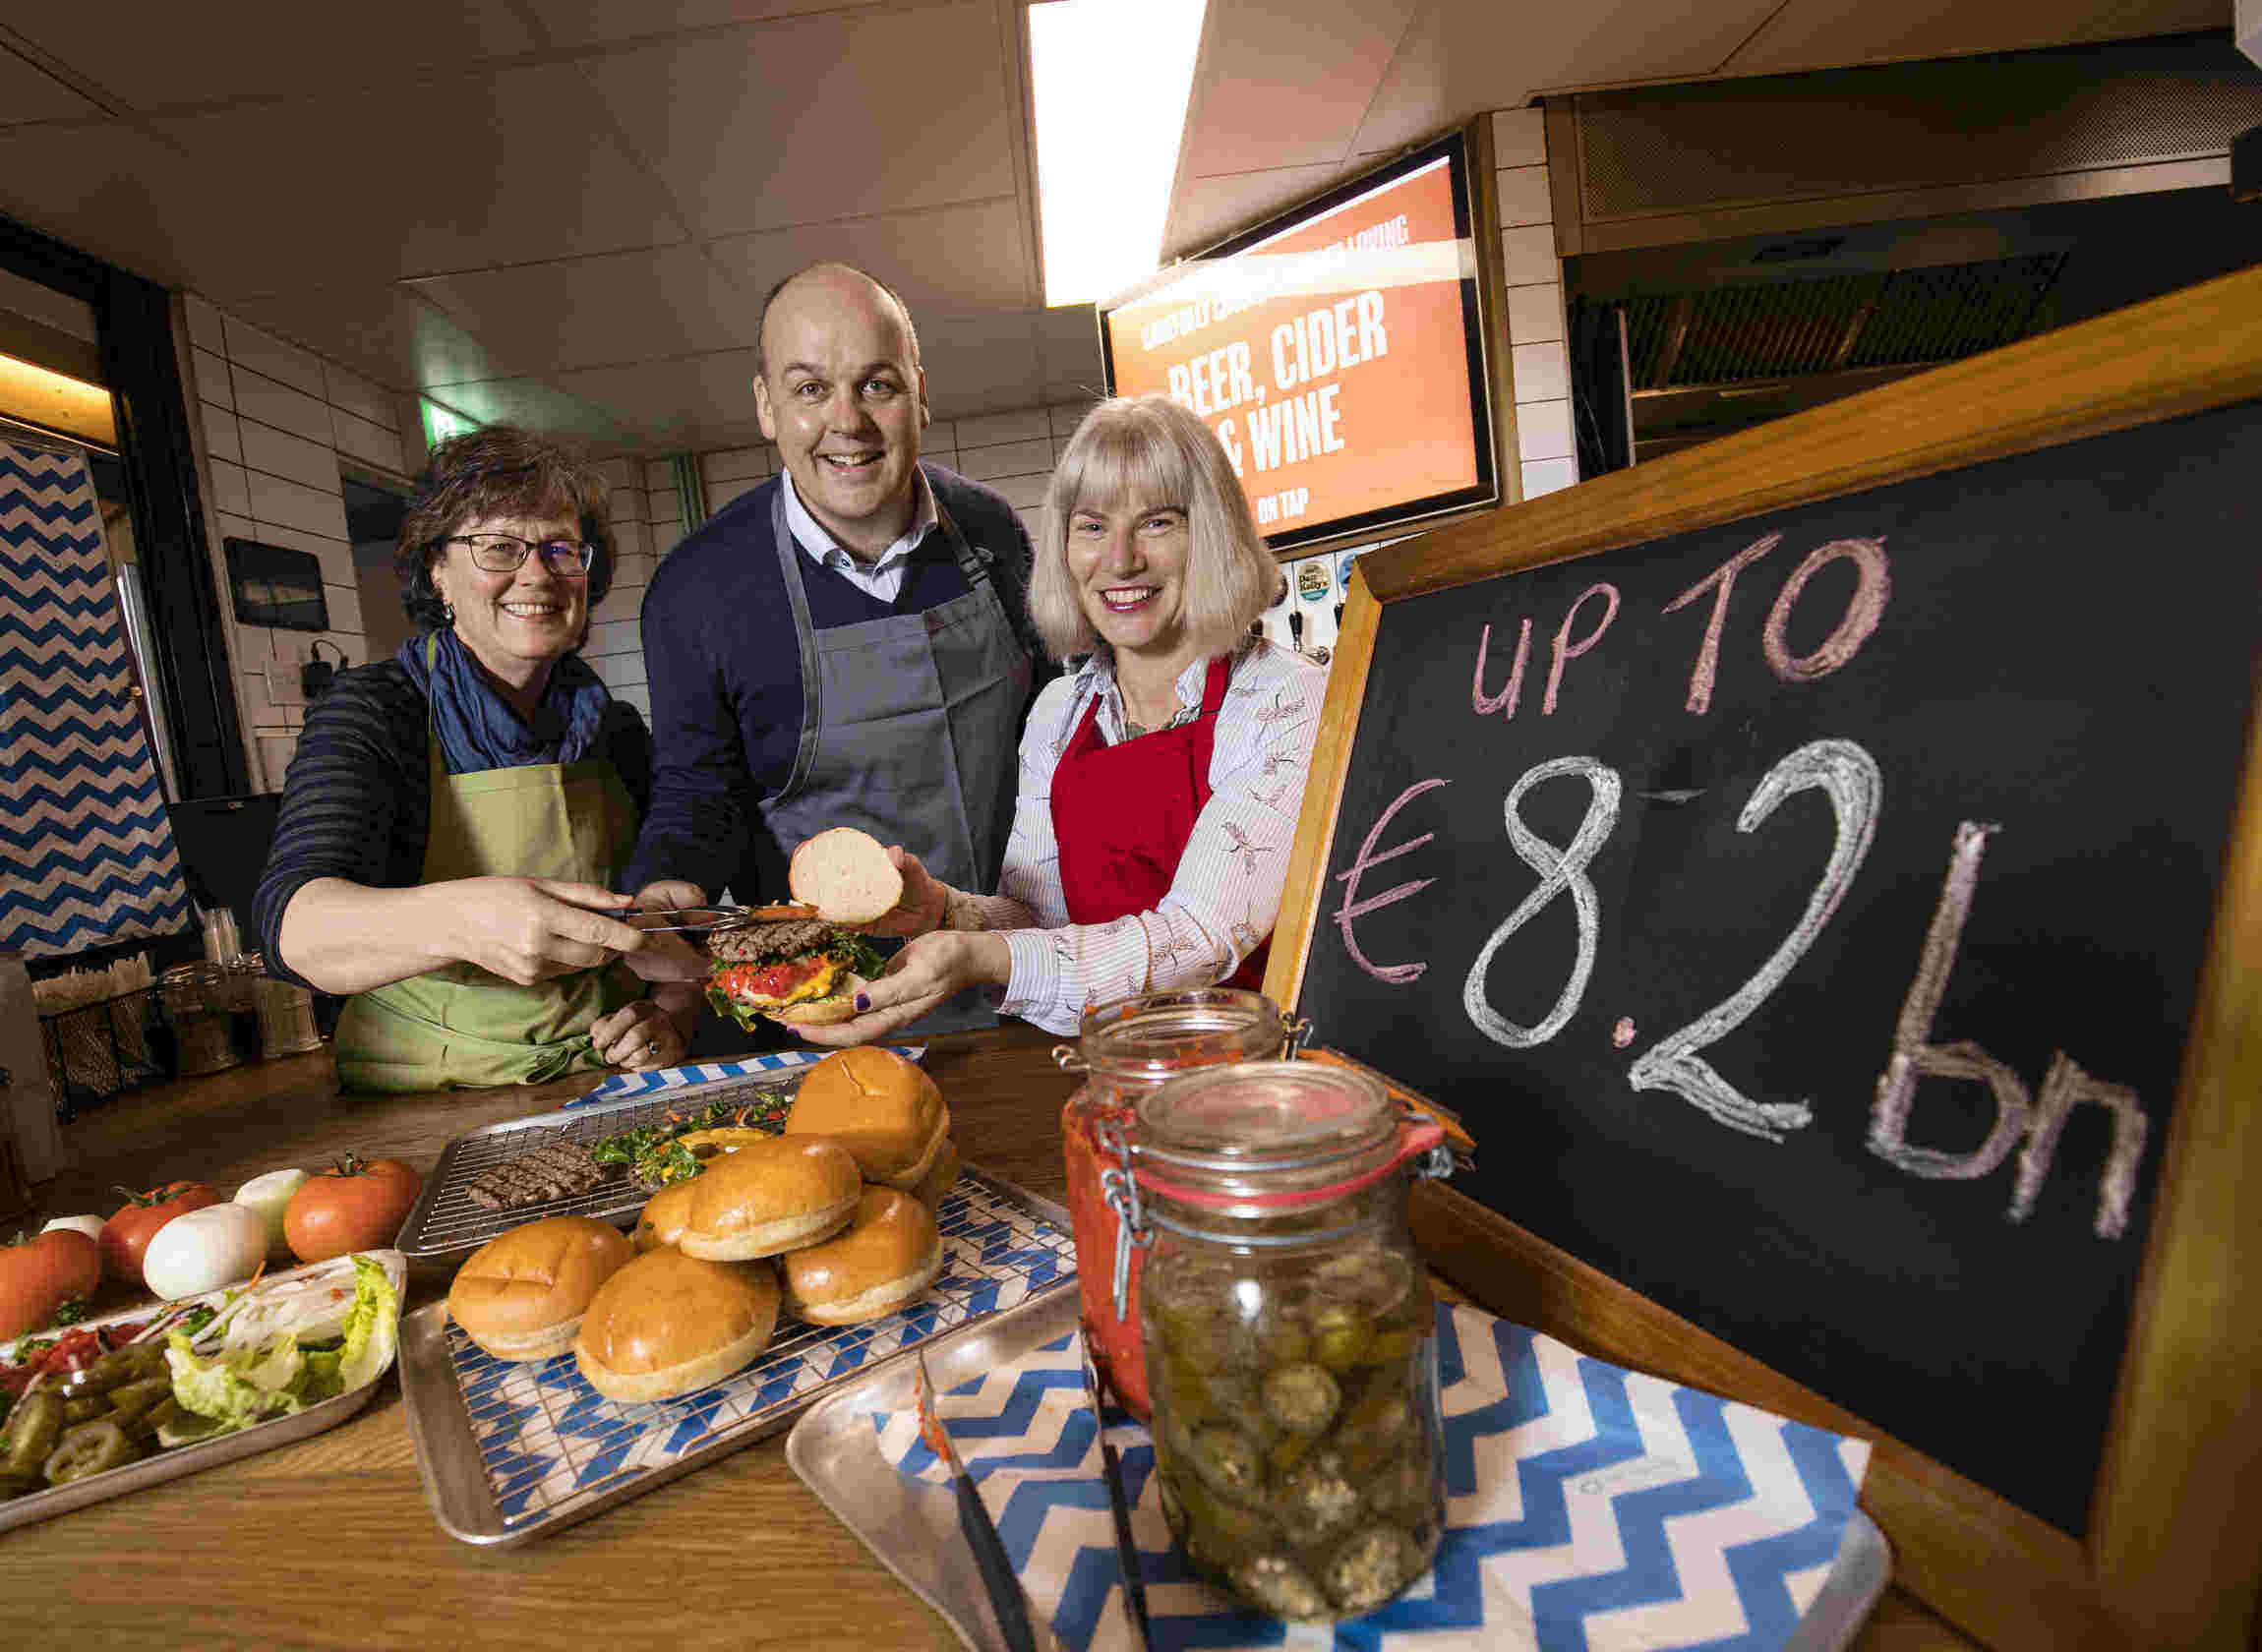 From left: Mindy O’Brien of Voice Ireland, Michael Sheary of Bujo and Maureen Gahan from Bord Bia who celebrated the findings of the 2018 Irish Foodservice Market Insights Report and who spoke at this year’s conference in the RDS.